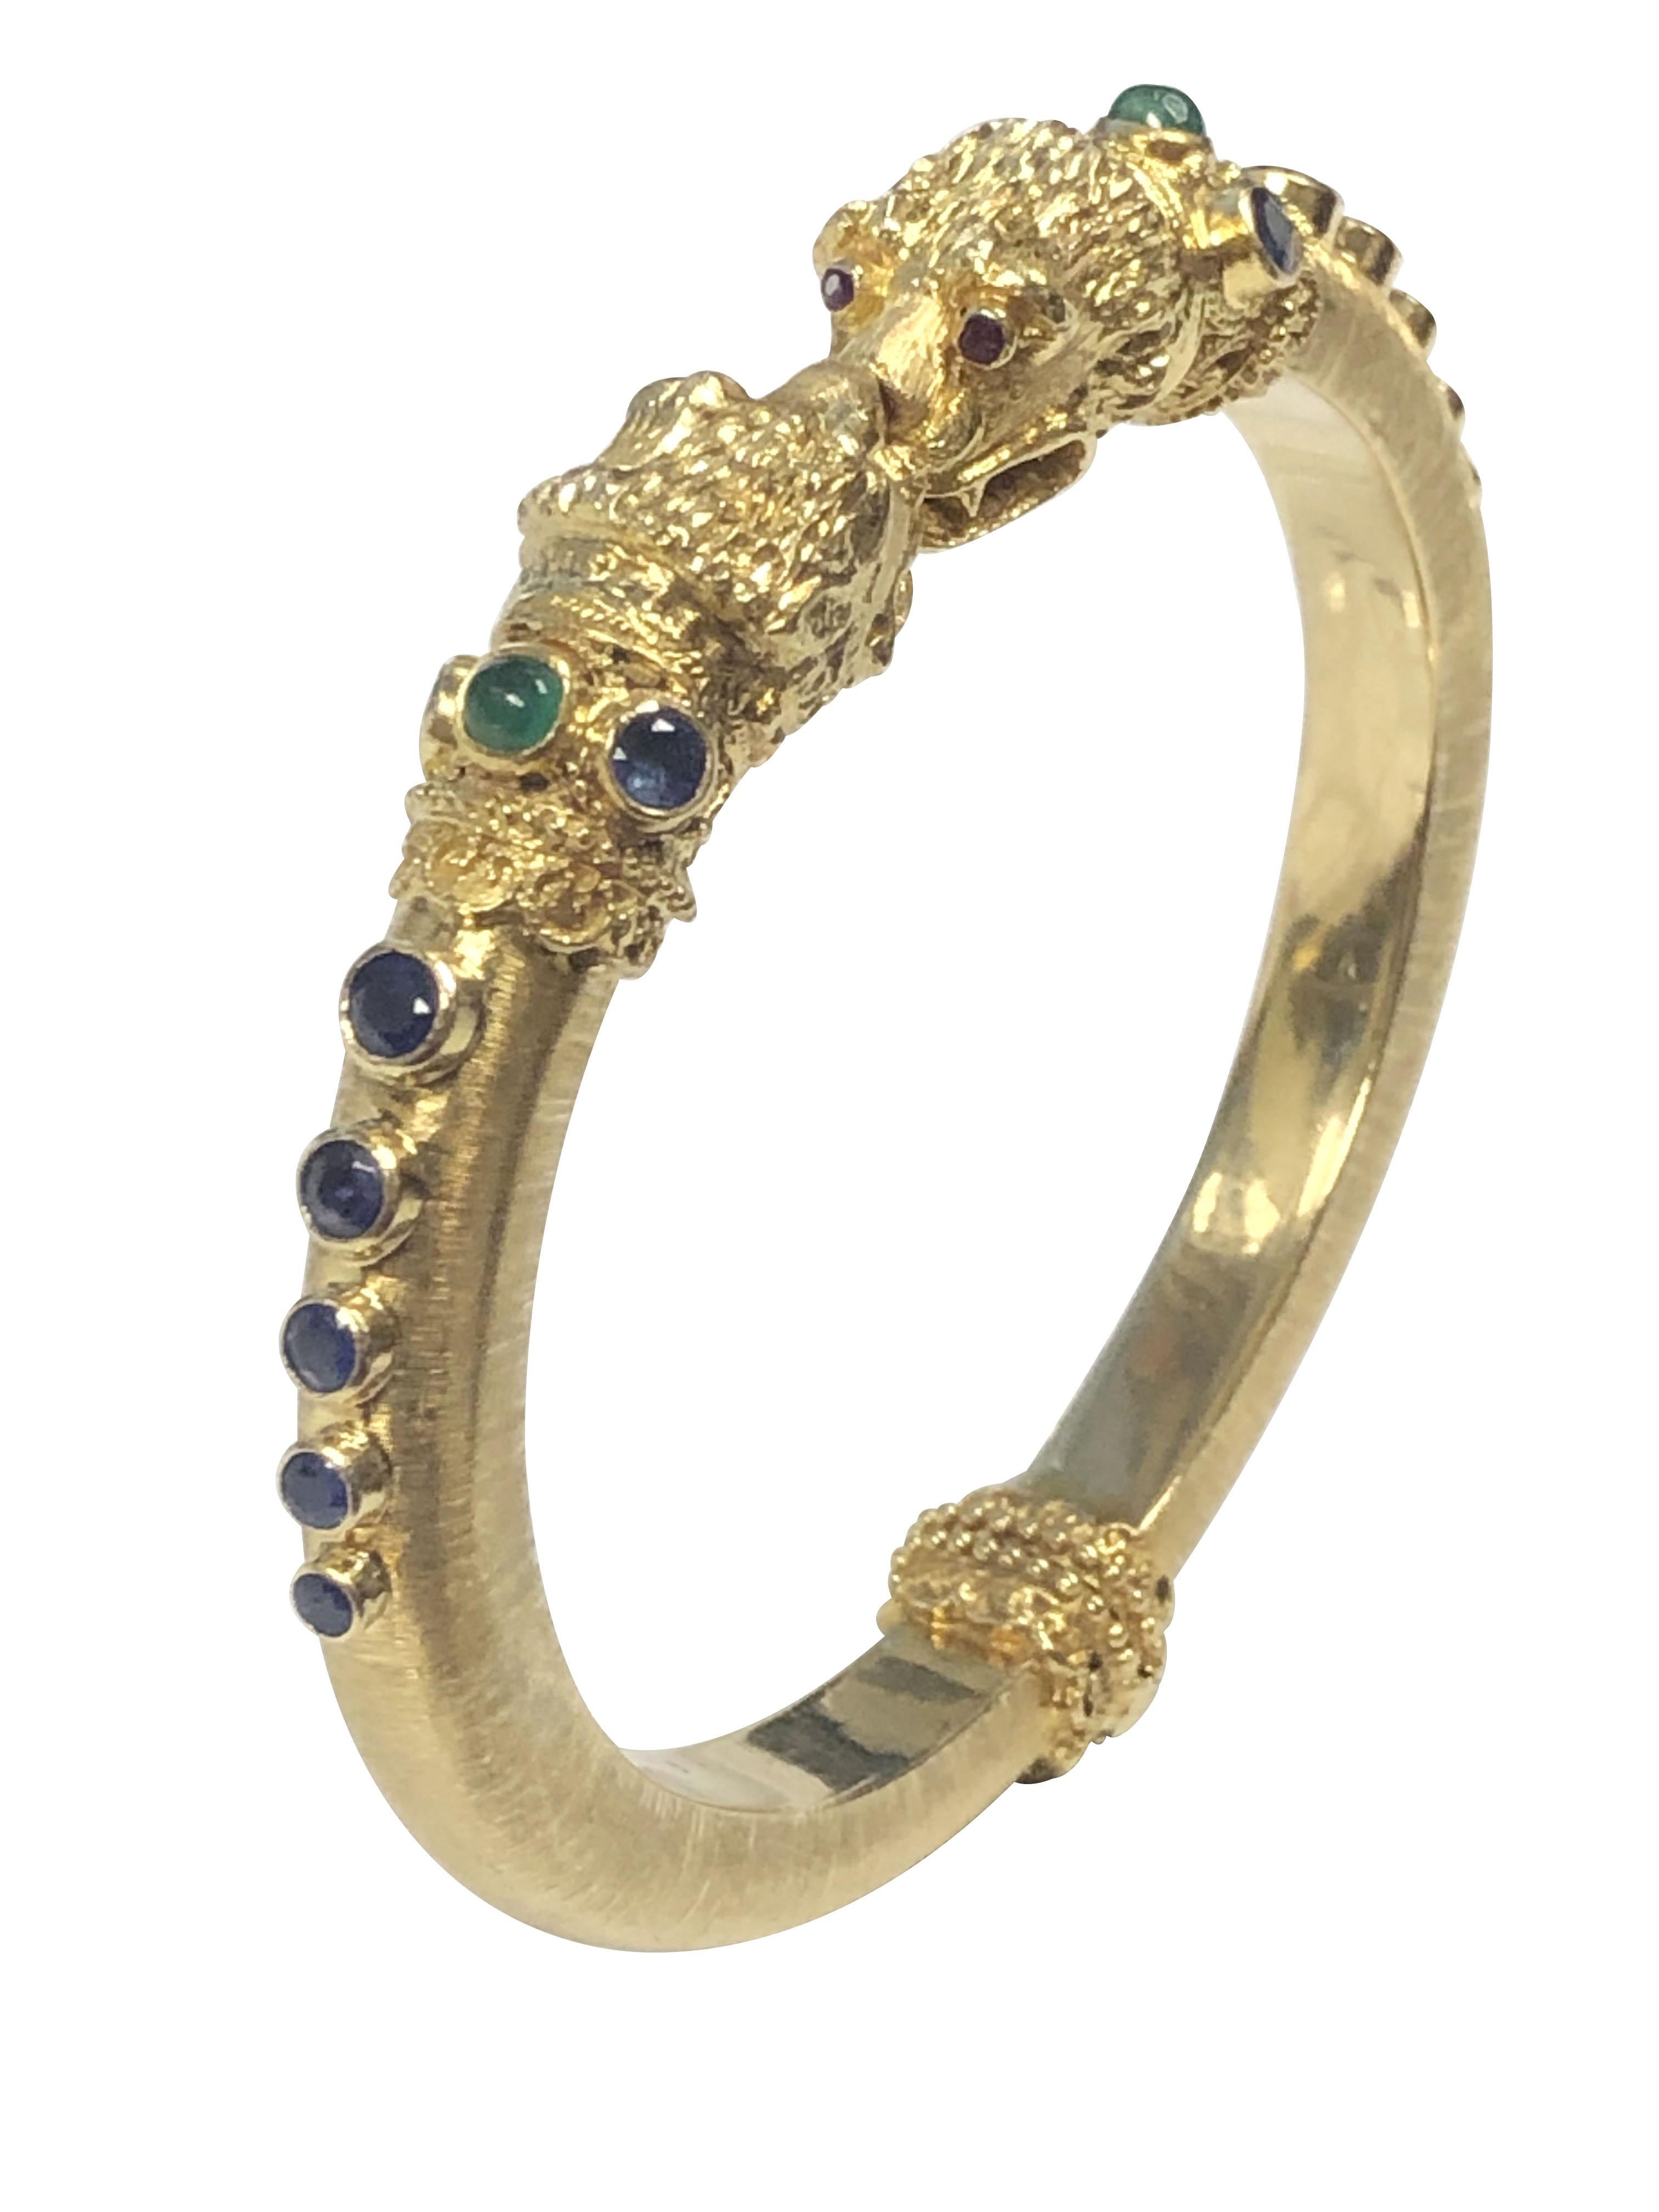 Circa 2000 Ilias Lalaounis Chimera Head hinged bangle Bracelet, 18K Yellow Gold and measuring 7 M.M. wide and weighing 44 Grams. with a light brushed finish,  finely detailed Chimera Heads and set with Cabochon Emeralds, Faceted Sapphires and Ruby